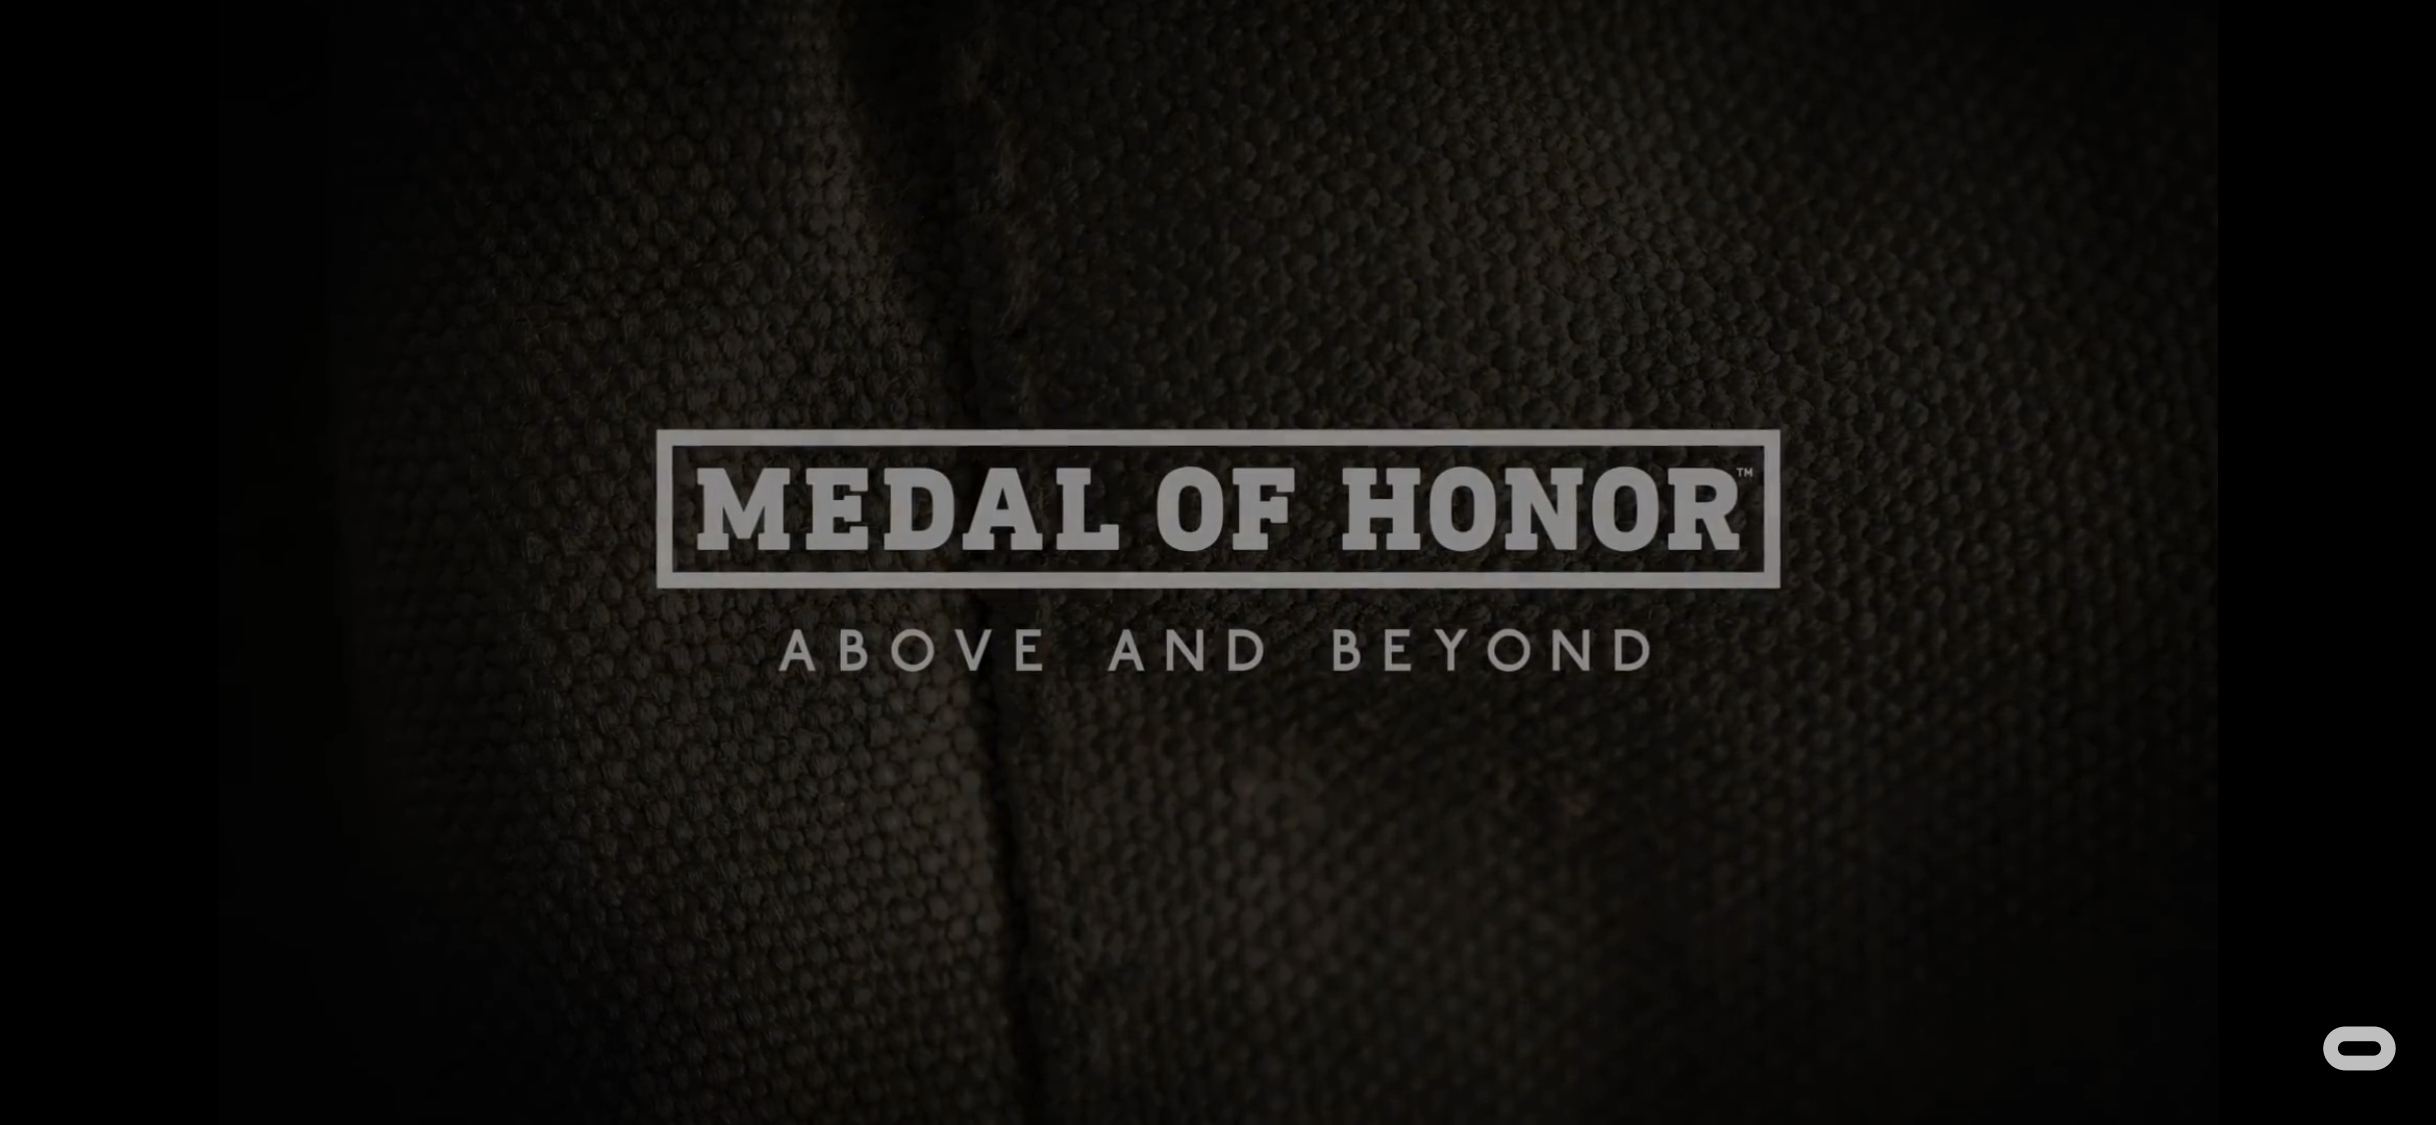 Medal of Honor returns in VR with Above and Beyond